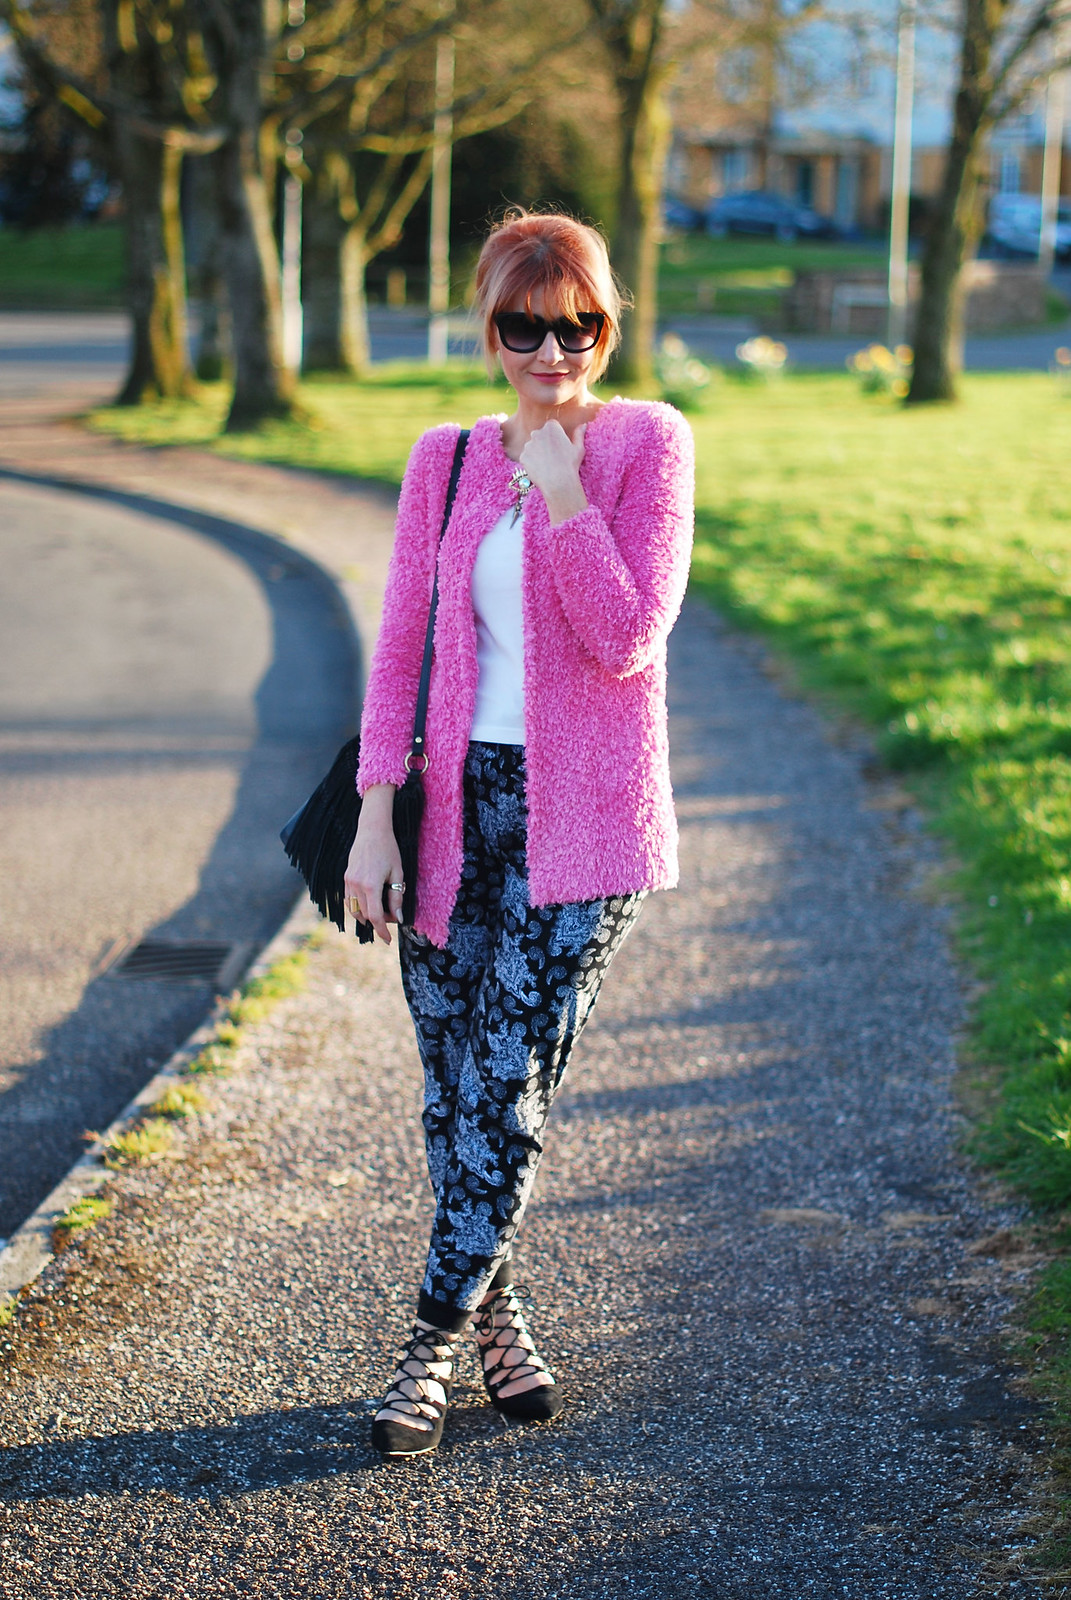 Spring style: Fluffy pink cardigan, paisley joggers, black lace up pointed flats, up do, cat eye sunglasses, evil eye brooch